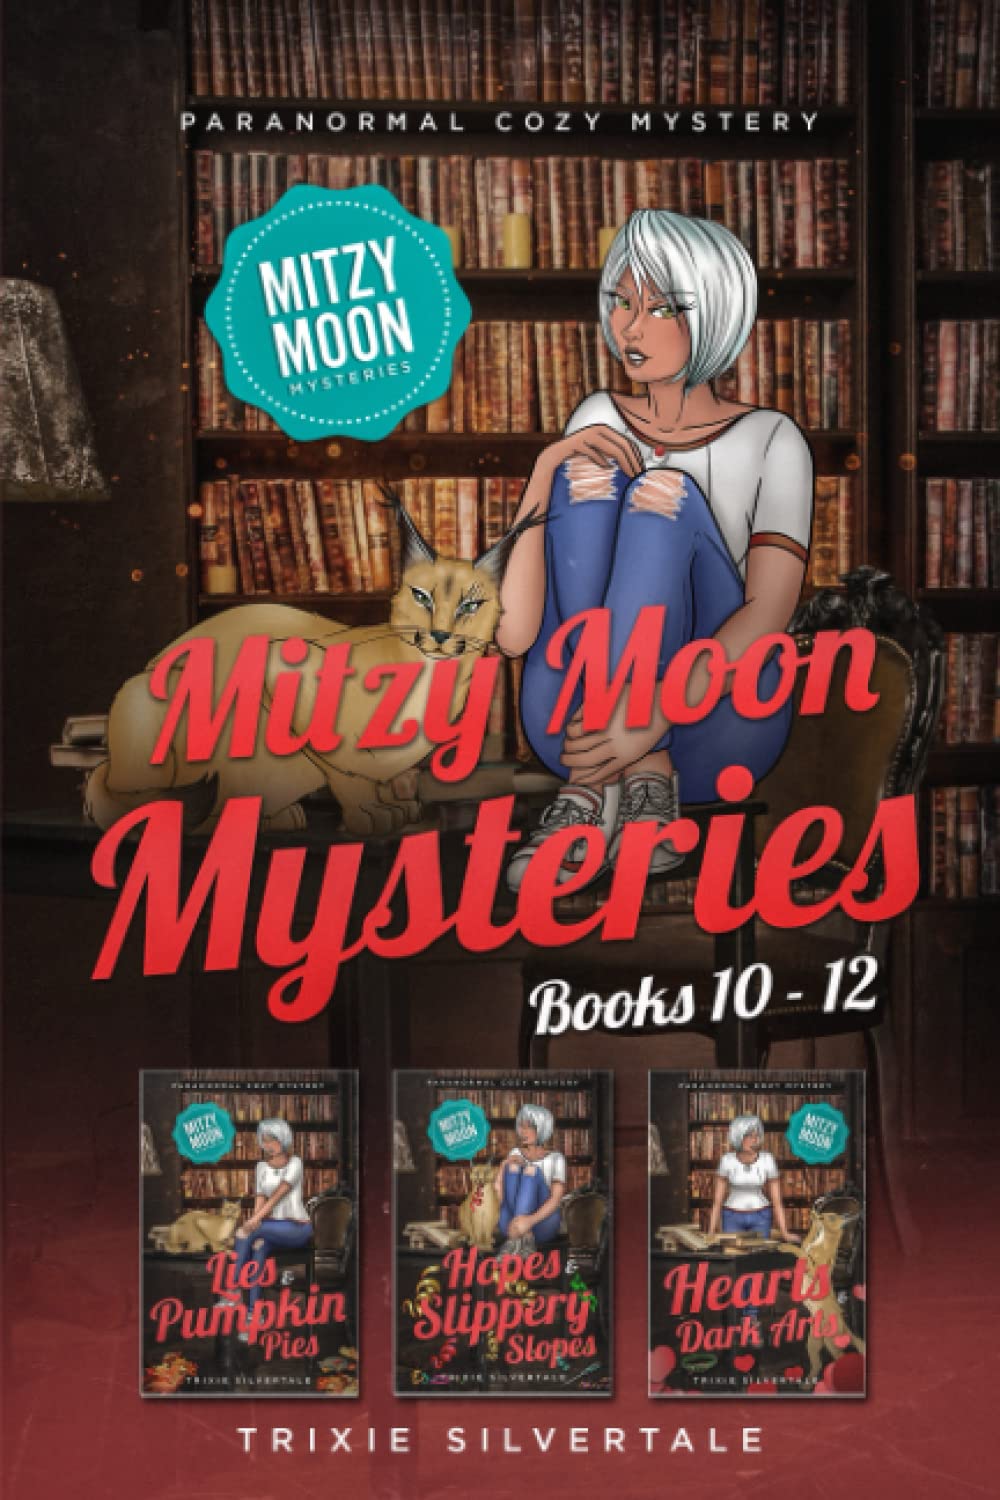 Mitzy Moon Mysteries Books 10-12 Paranormal Cozy Mystery (Mitzy Moon Mysteries Box Set #4) - SureShot Books